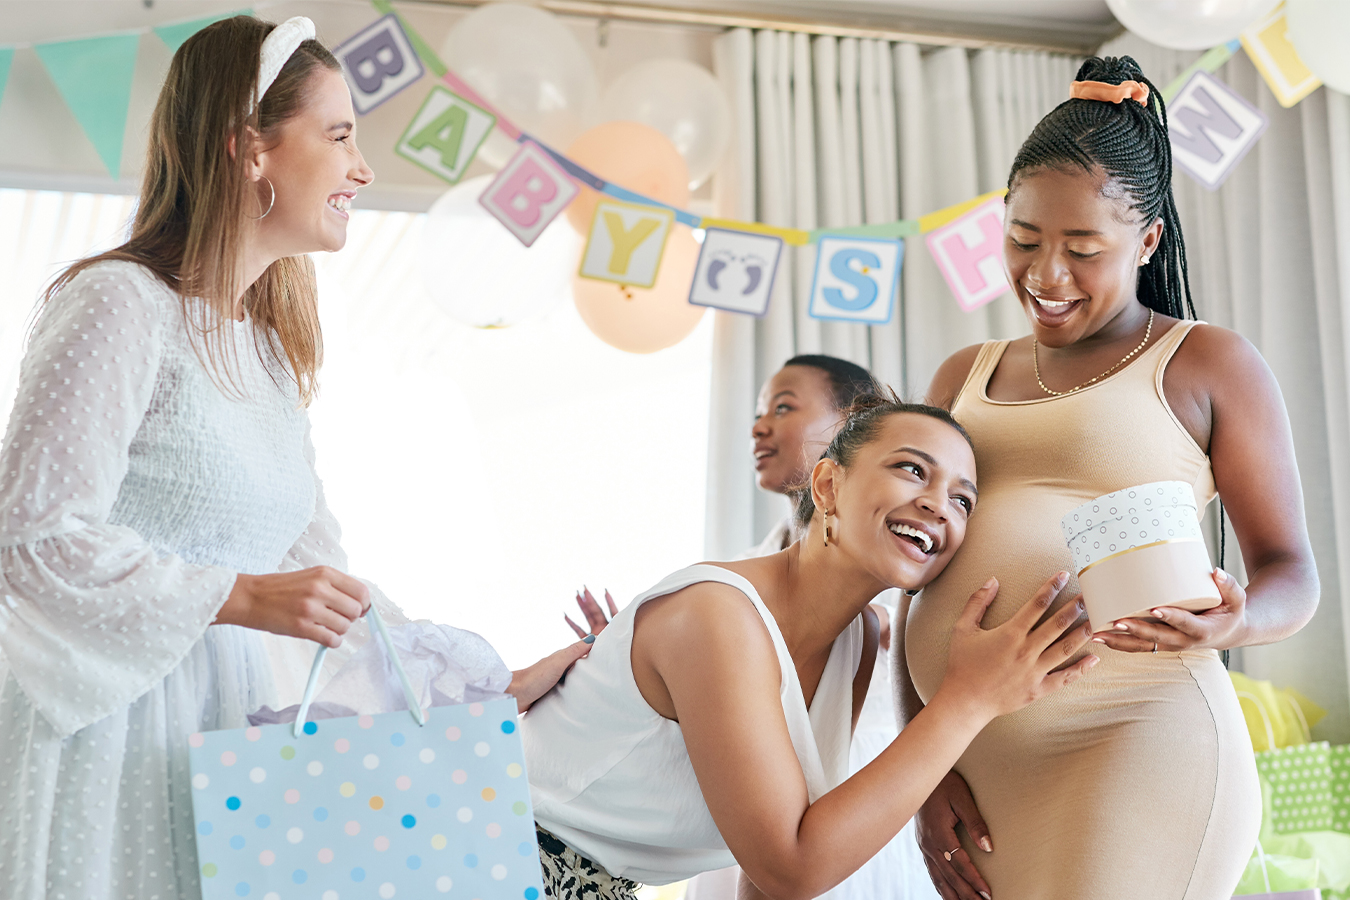 25 Exciting Prize Ideas for Baby Shower Game Winners